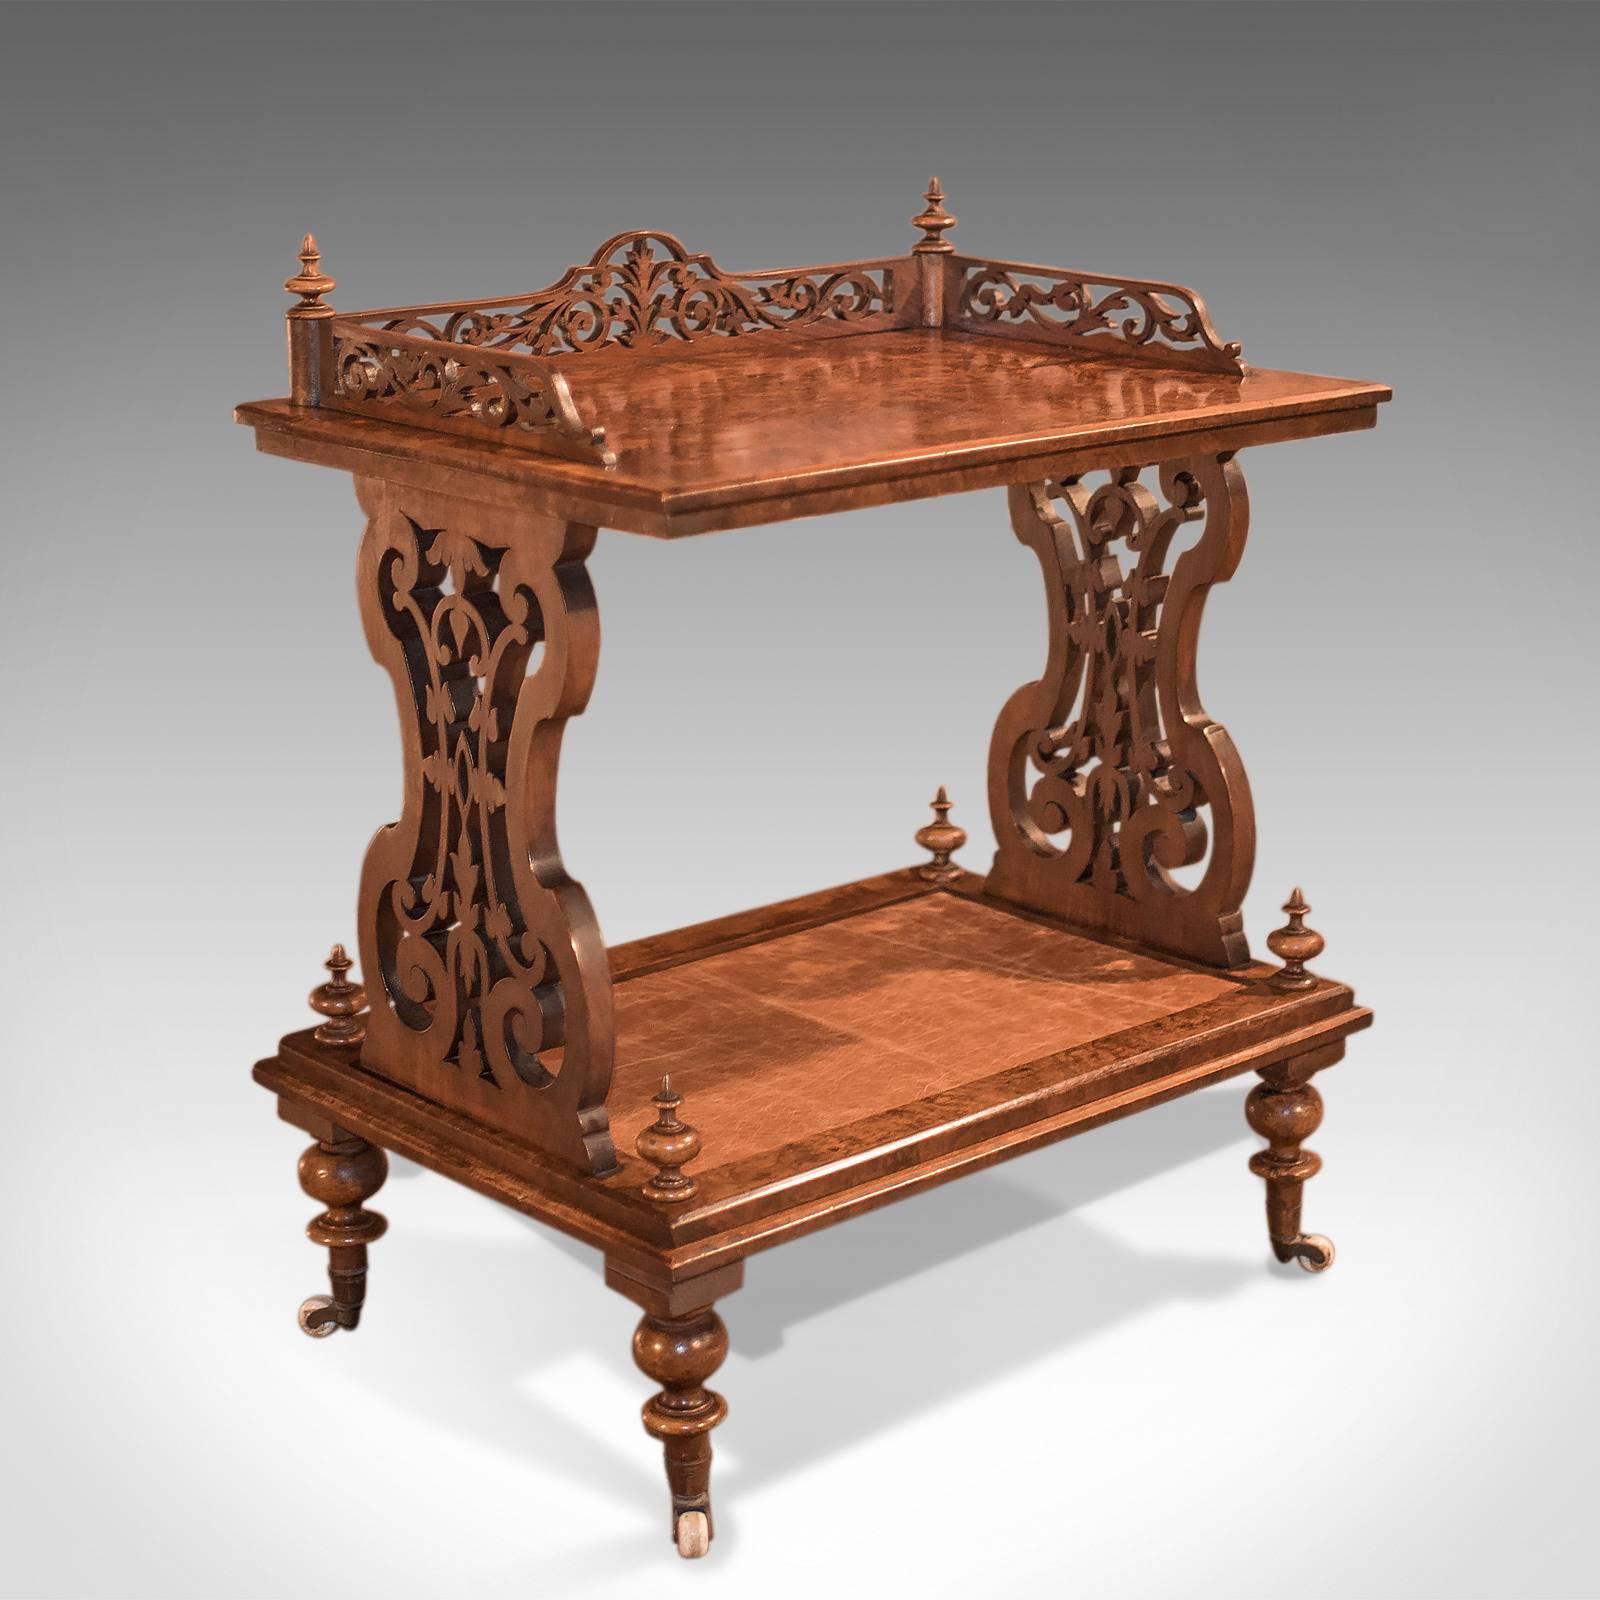 An appealing antique side table or drinks trolley, late Regency, circa 1830.

Superb quality and construction
Desirable grain detail in the butterfly matched burr walnut top
Pierced fretwork gallery featuring foliate scrolls and turned